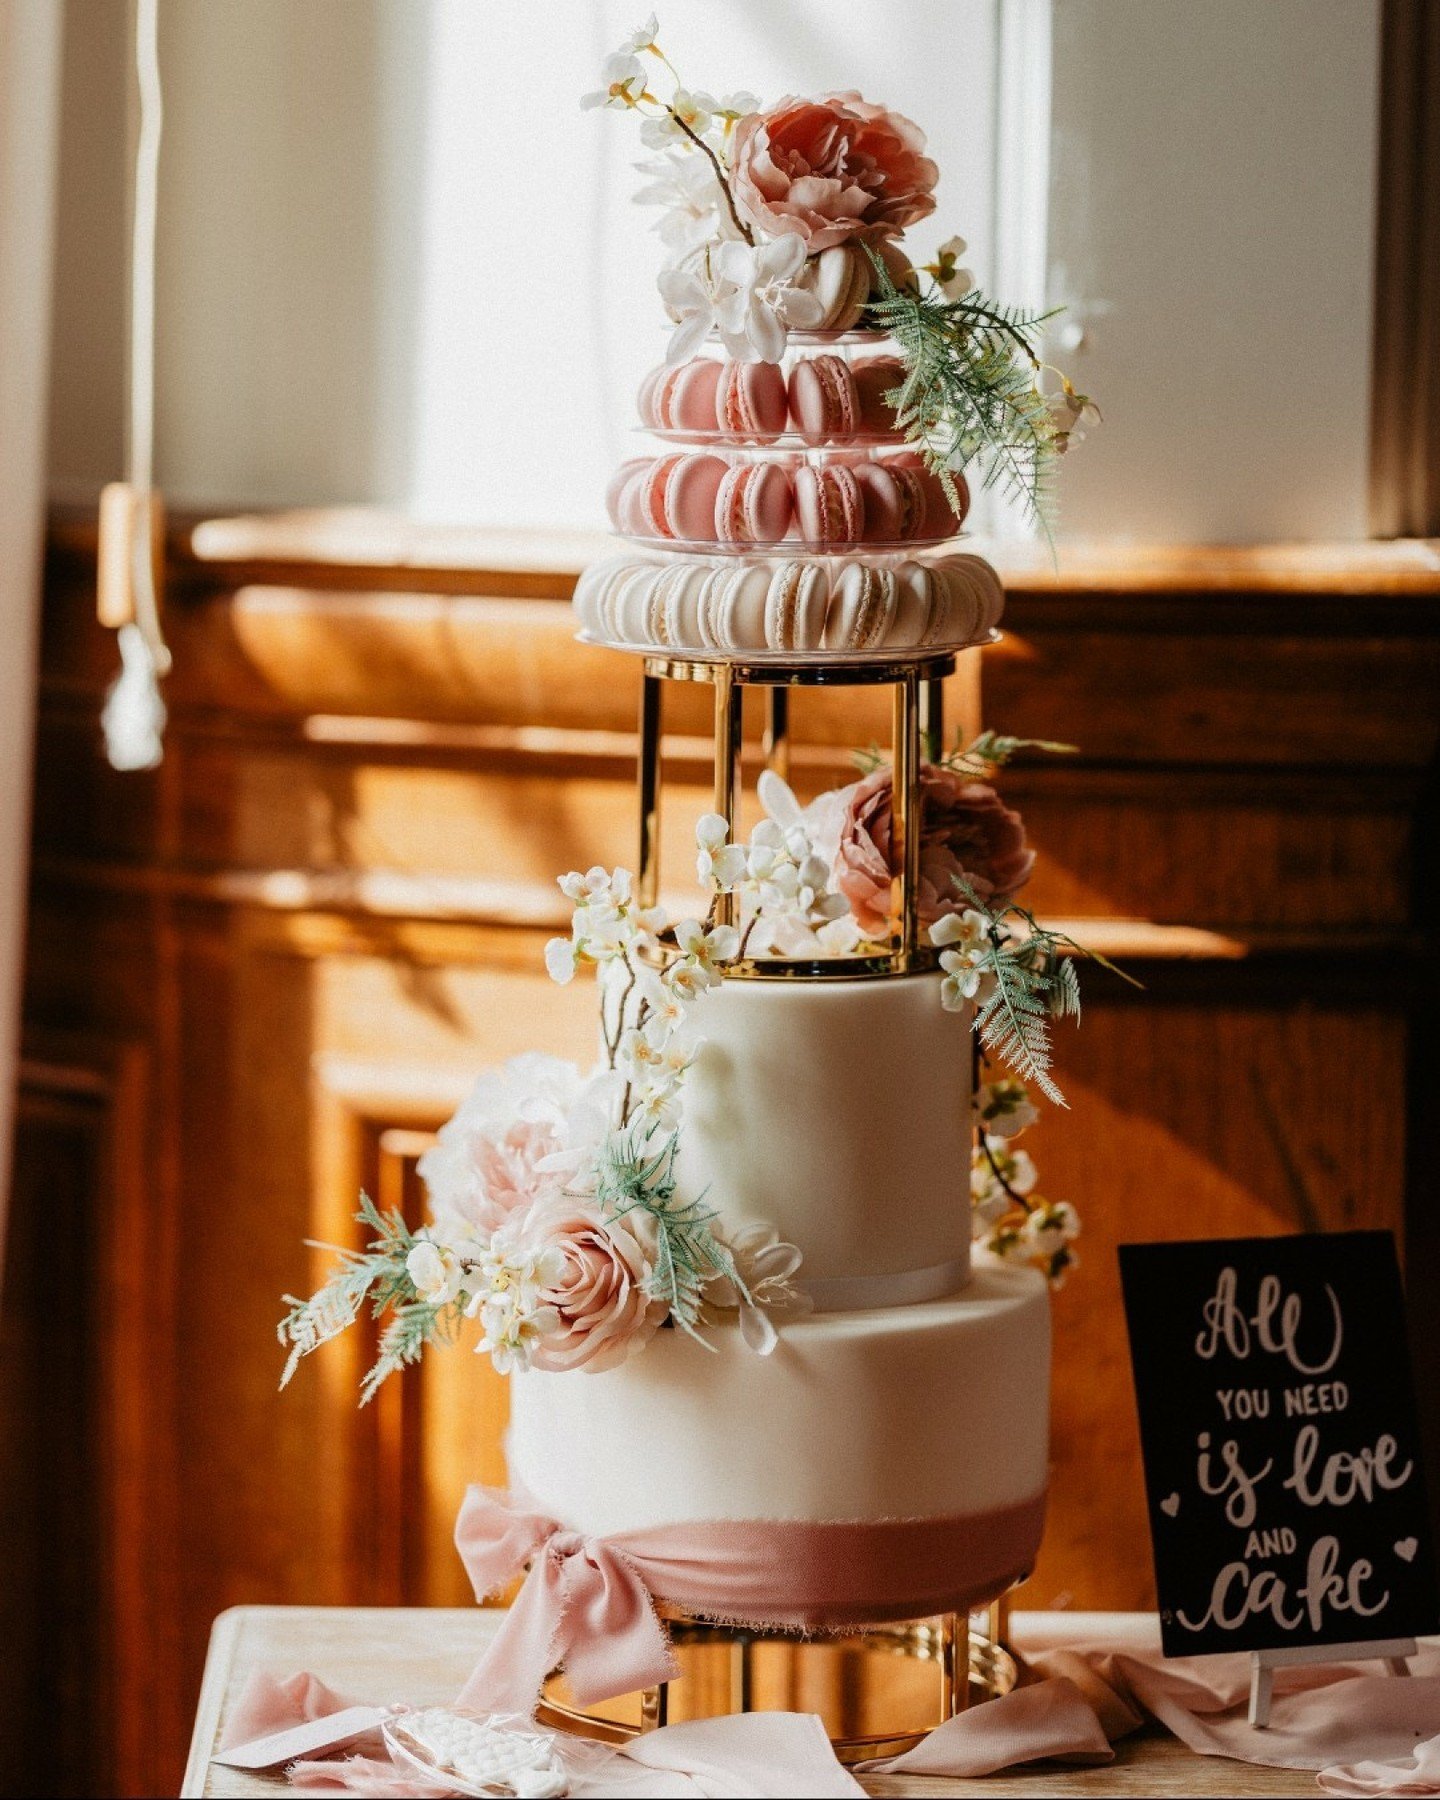 What do you do when you want both cake and macarons...you order both of course!

How beautiful is this cake by @cakesbymrsf captured by the ever so talented @benjaminstuartphotography during the recent Open Day at @grittletonhouseevents

#weddingcake